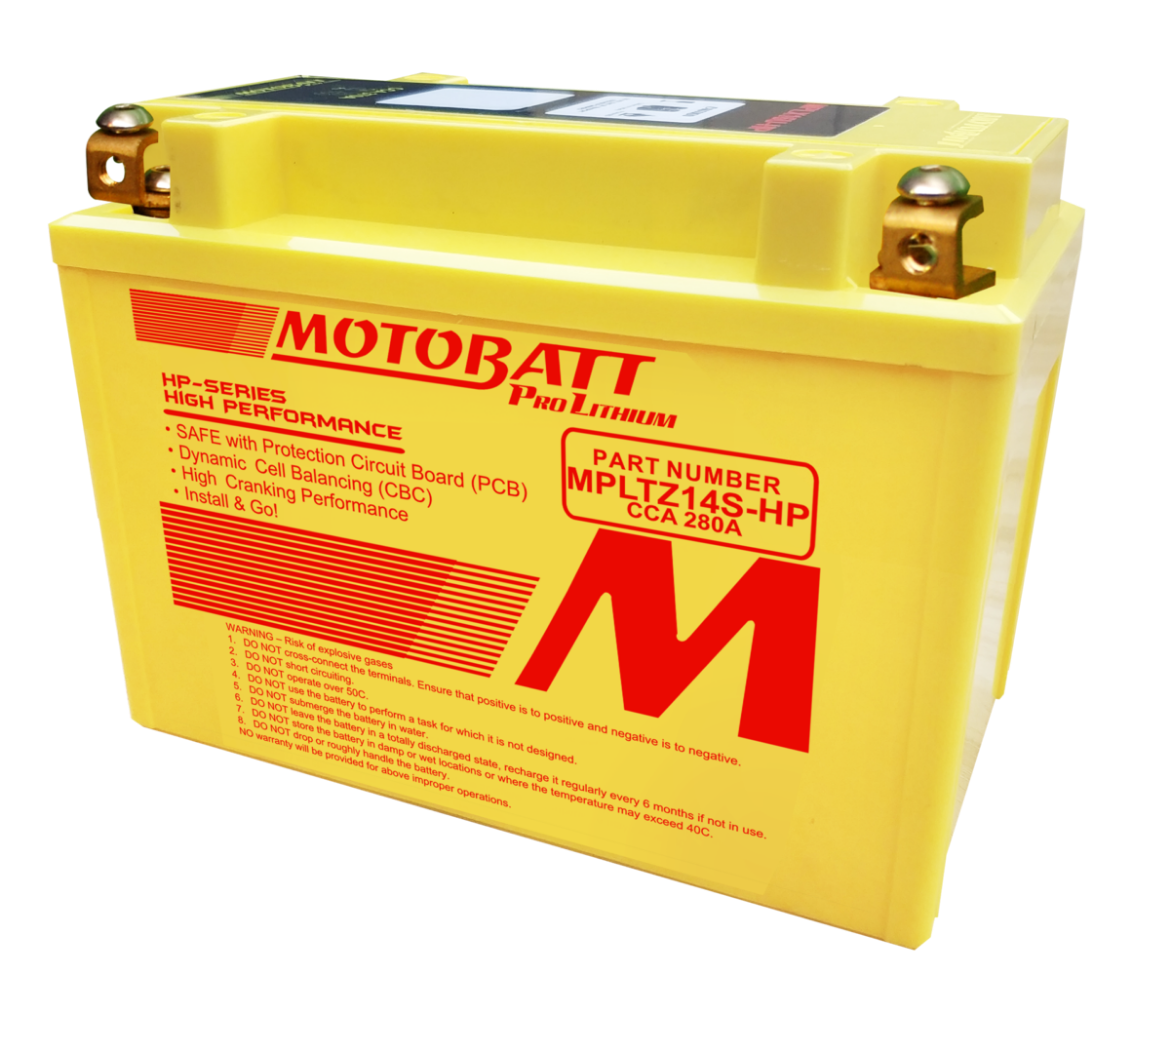 Picture of MPLTZ14S-HP - 13.2VOLT 280CCA 4AH MOTOBATT LITHIUM BATTERY WITH PROTECTION CIRCUIT BOARD (PCB) - RHP